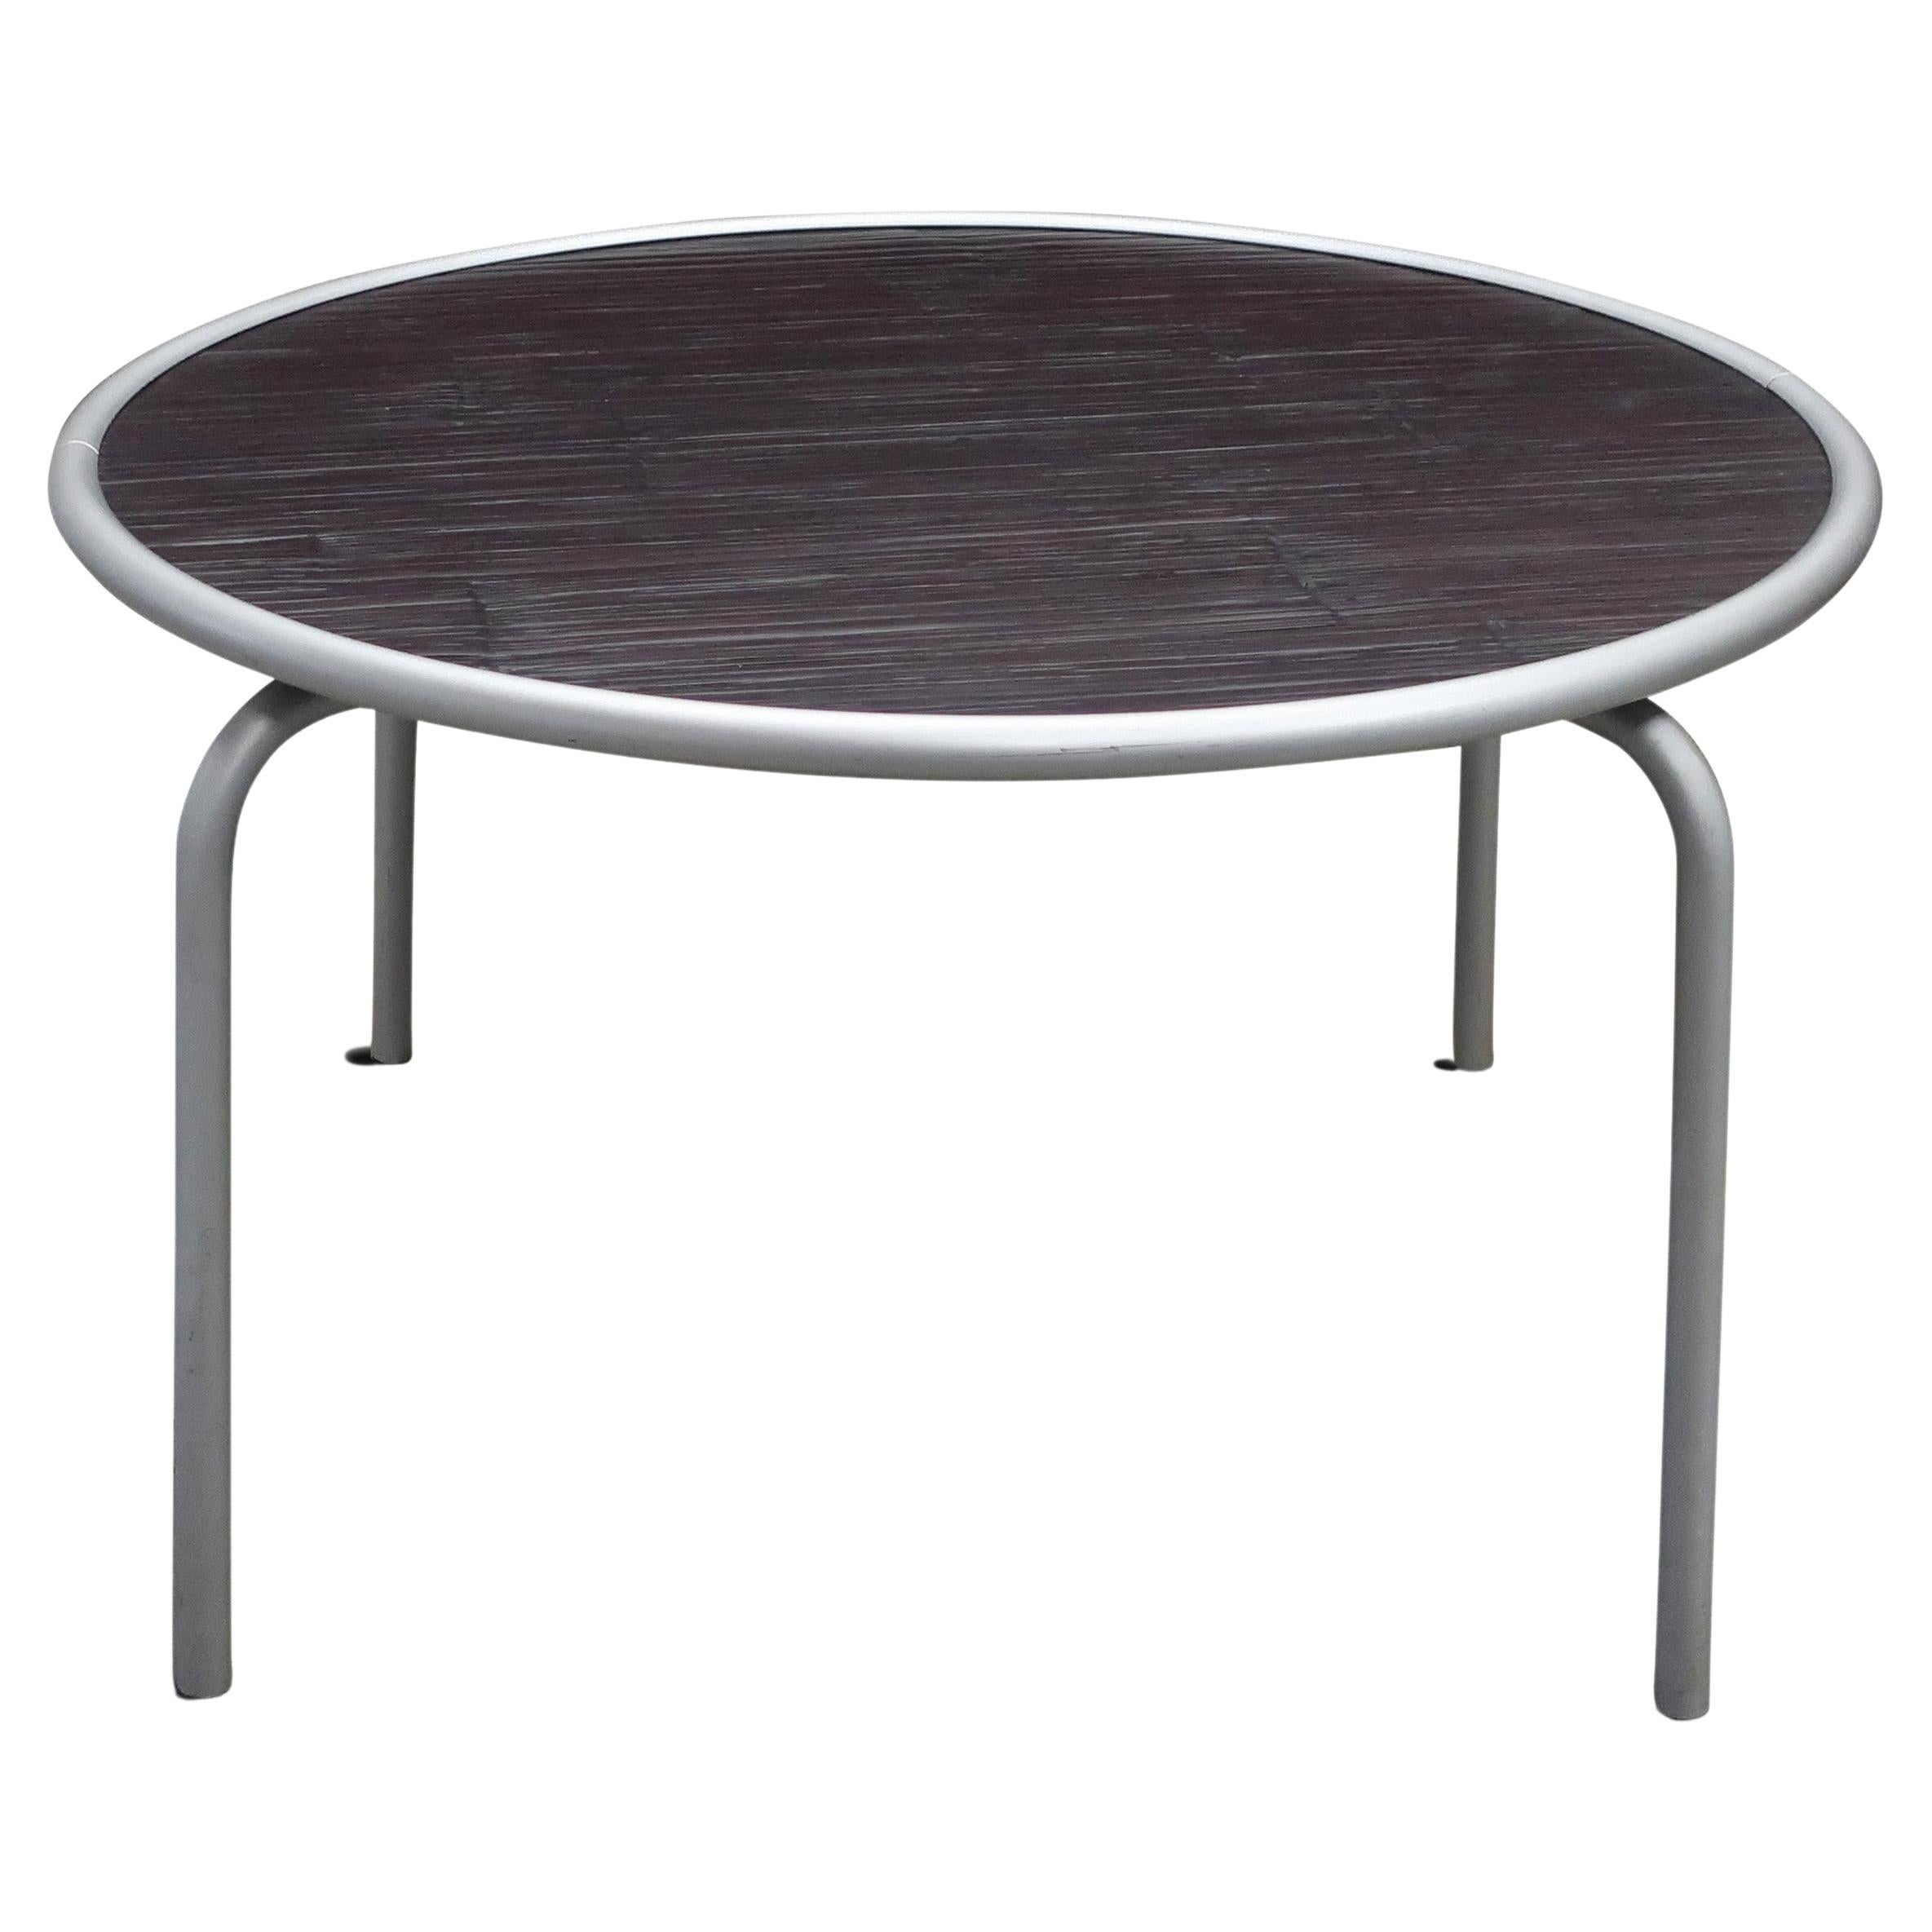 Allu 136 Dining Table by Paola Navone for Gervasoni, '1999' For Sale